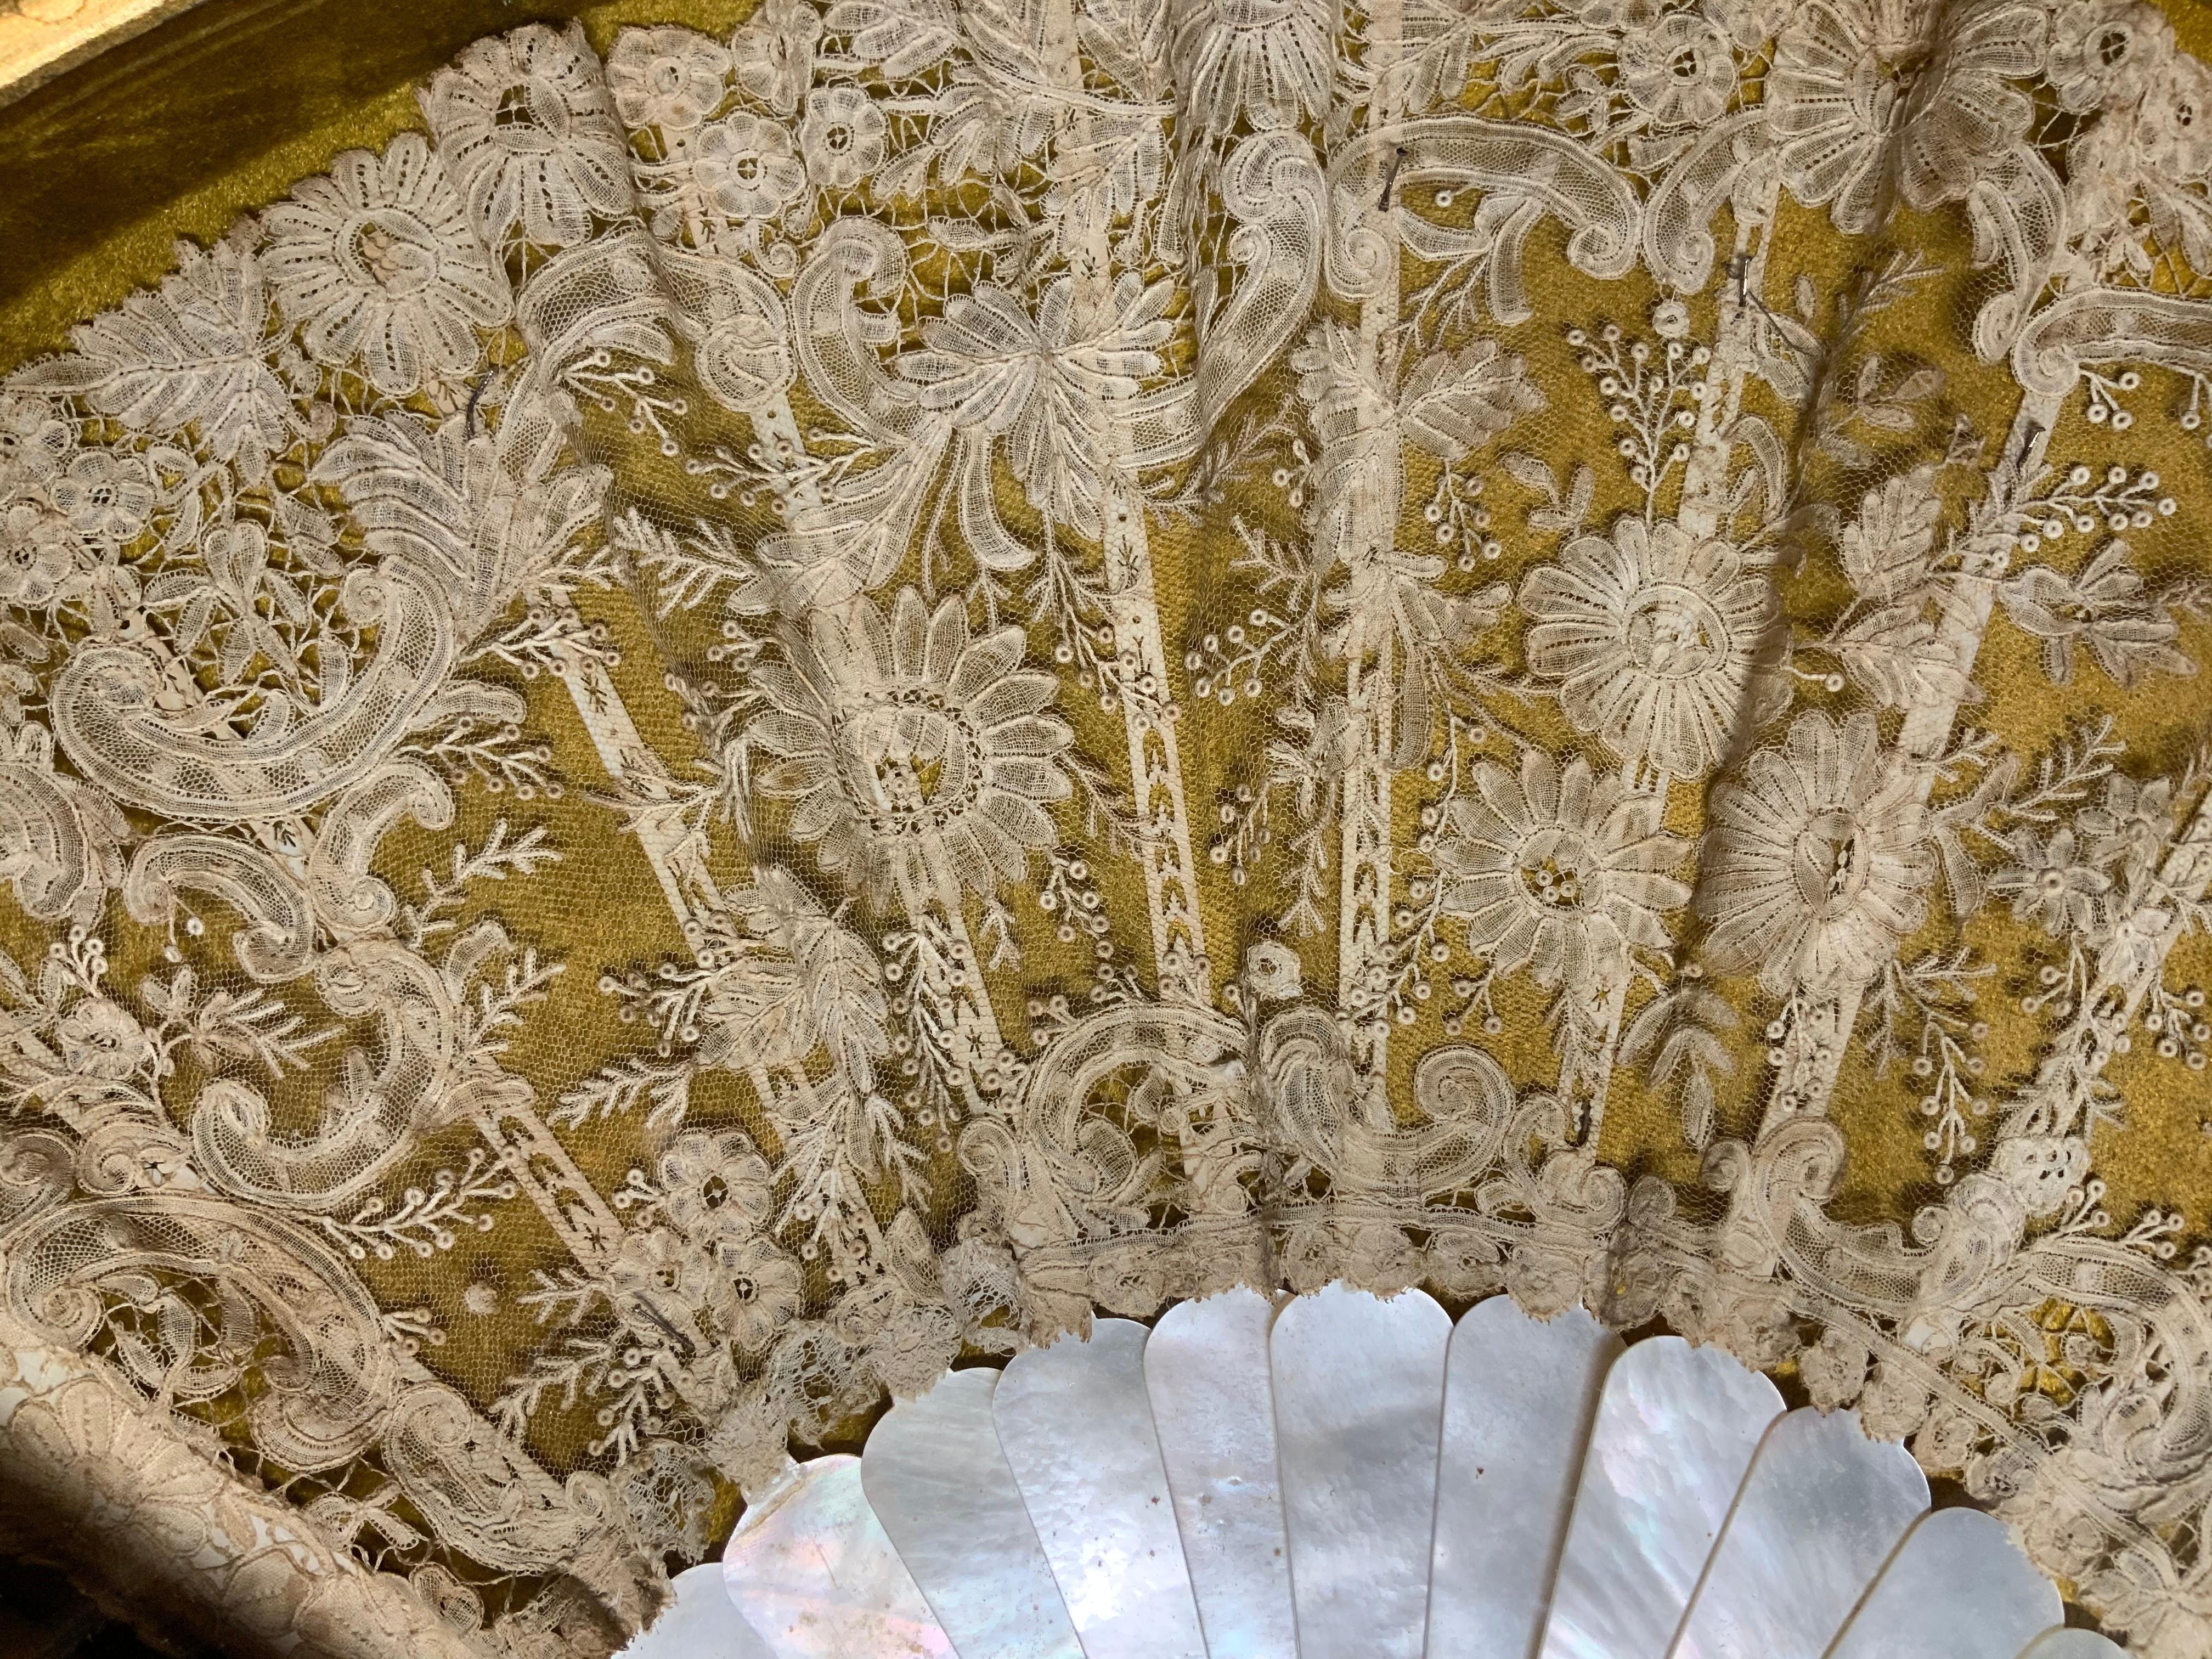 Mother of Pearl and Lace Fan Gilt Wood Display In Good Condition For Sale In Guaynabo, PR